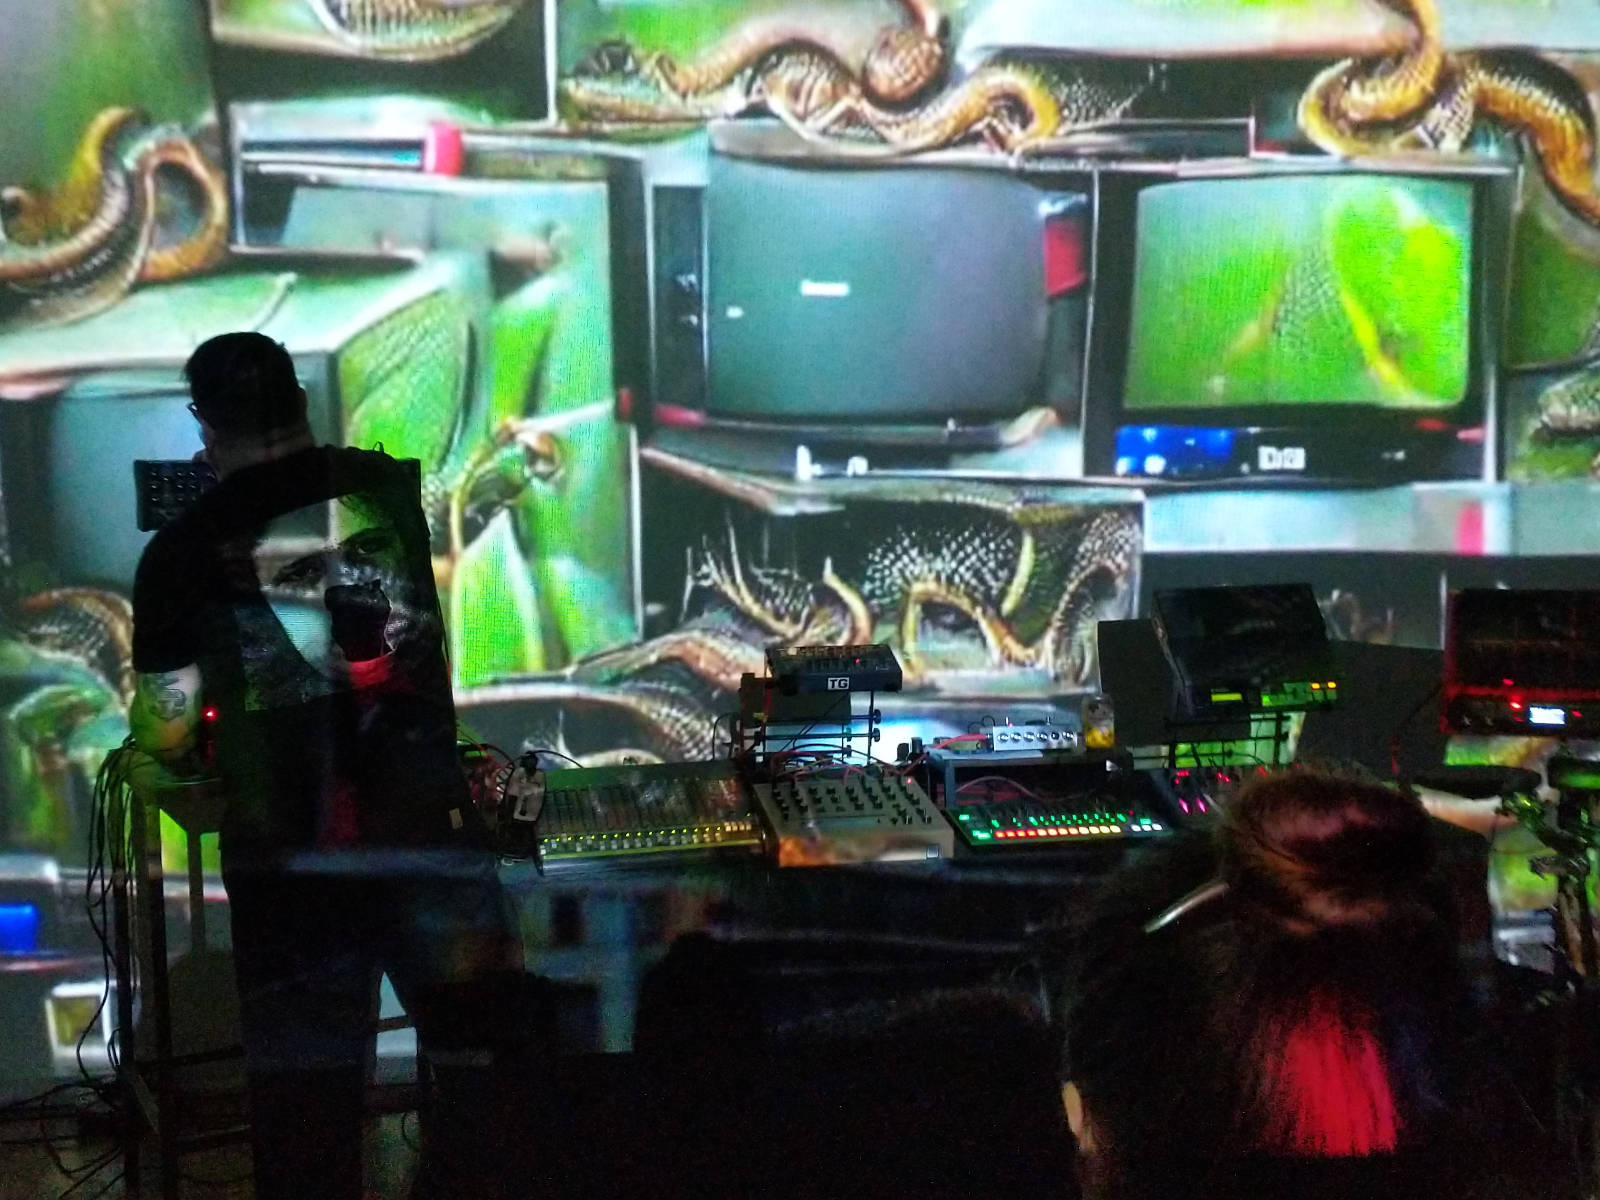 Iggor Cavalera
bends over a table full of synthesisers. A GAN-generated image of an impossible
scene that seems to be old TVs and snakes is projected onto the wall.